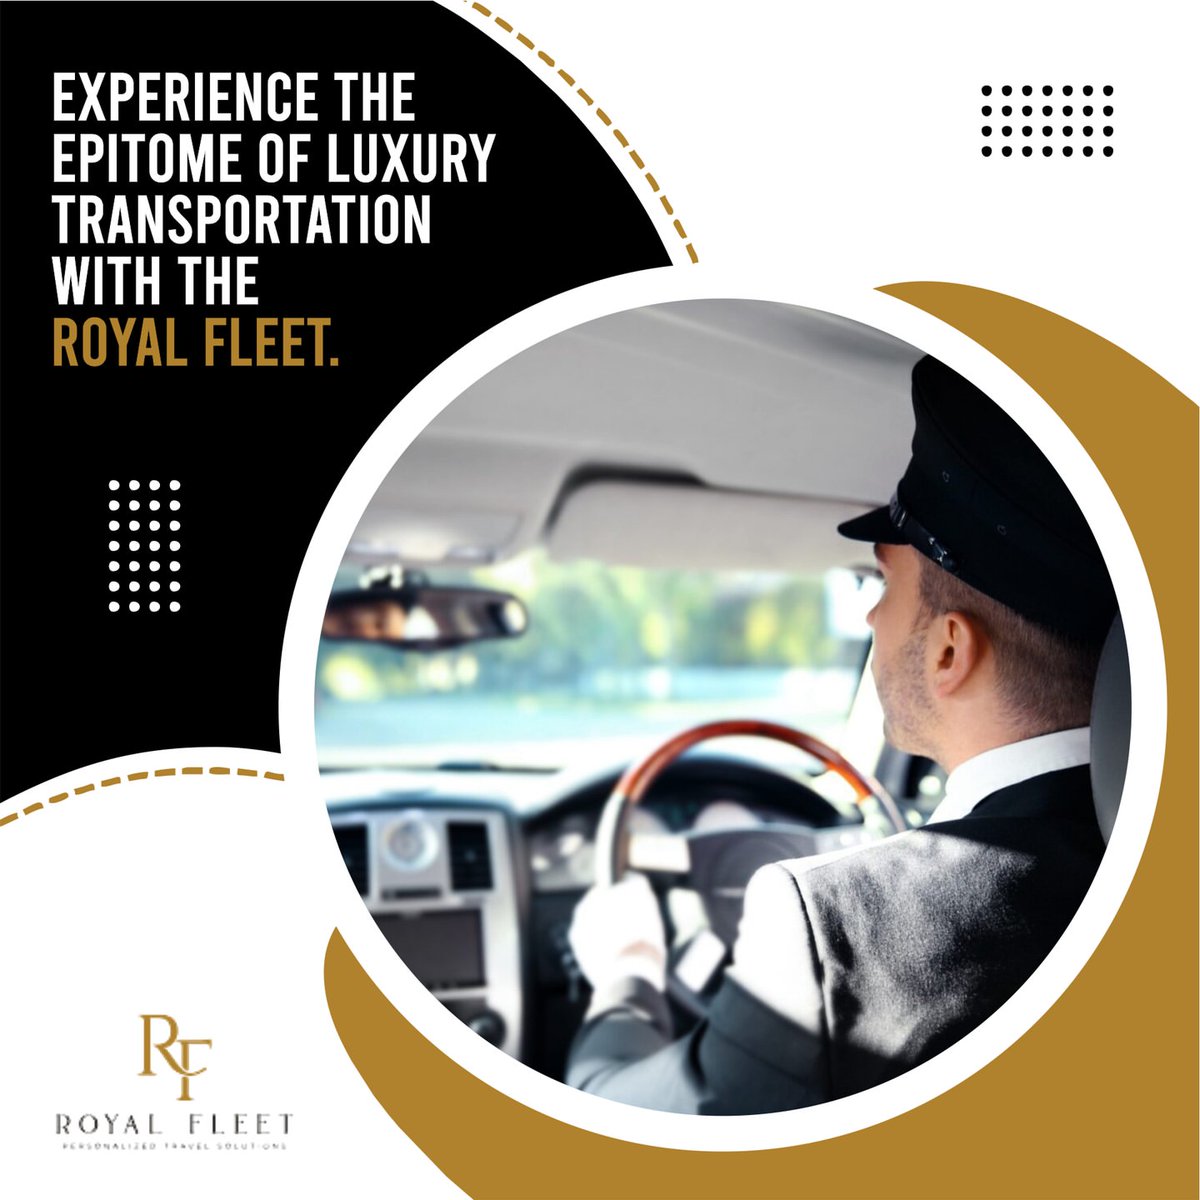 Step into a realm of pure indulgence and impeccable service with the Royal Fleet.

#luxurytravel #opulenceonwheels #exceedingexpectations #impeccableservice #travelinstyle #pureindulgence #stateoftheartvehicles #unforgettablejourney #redefiningtravel #royalfleet